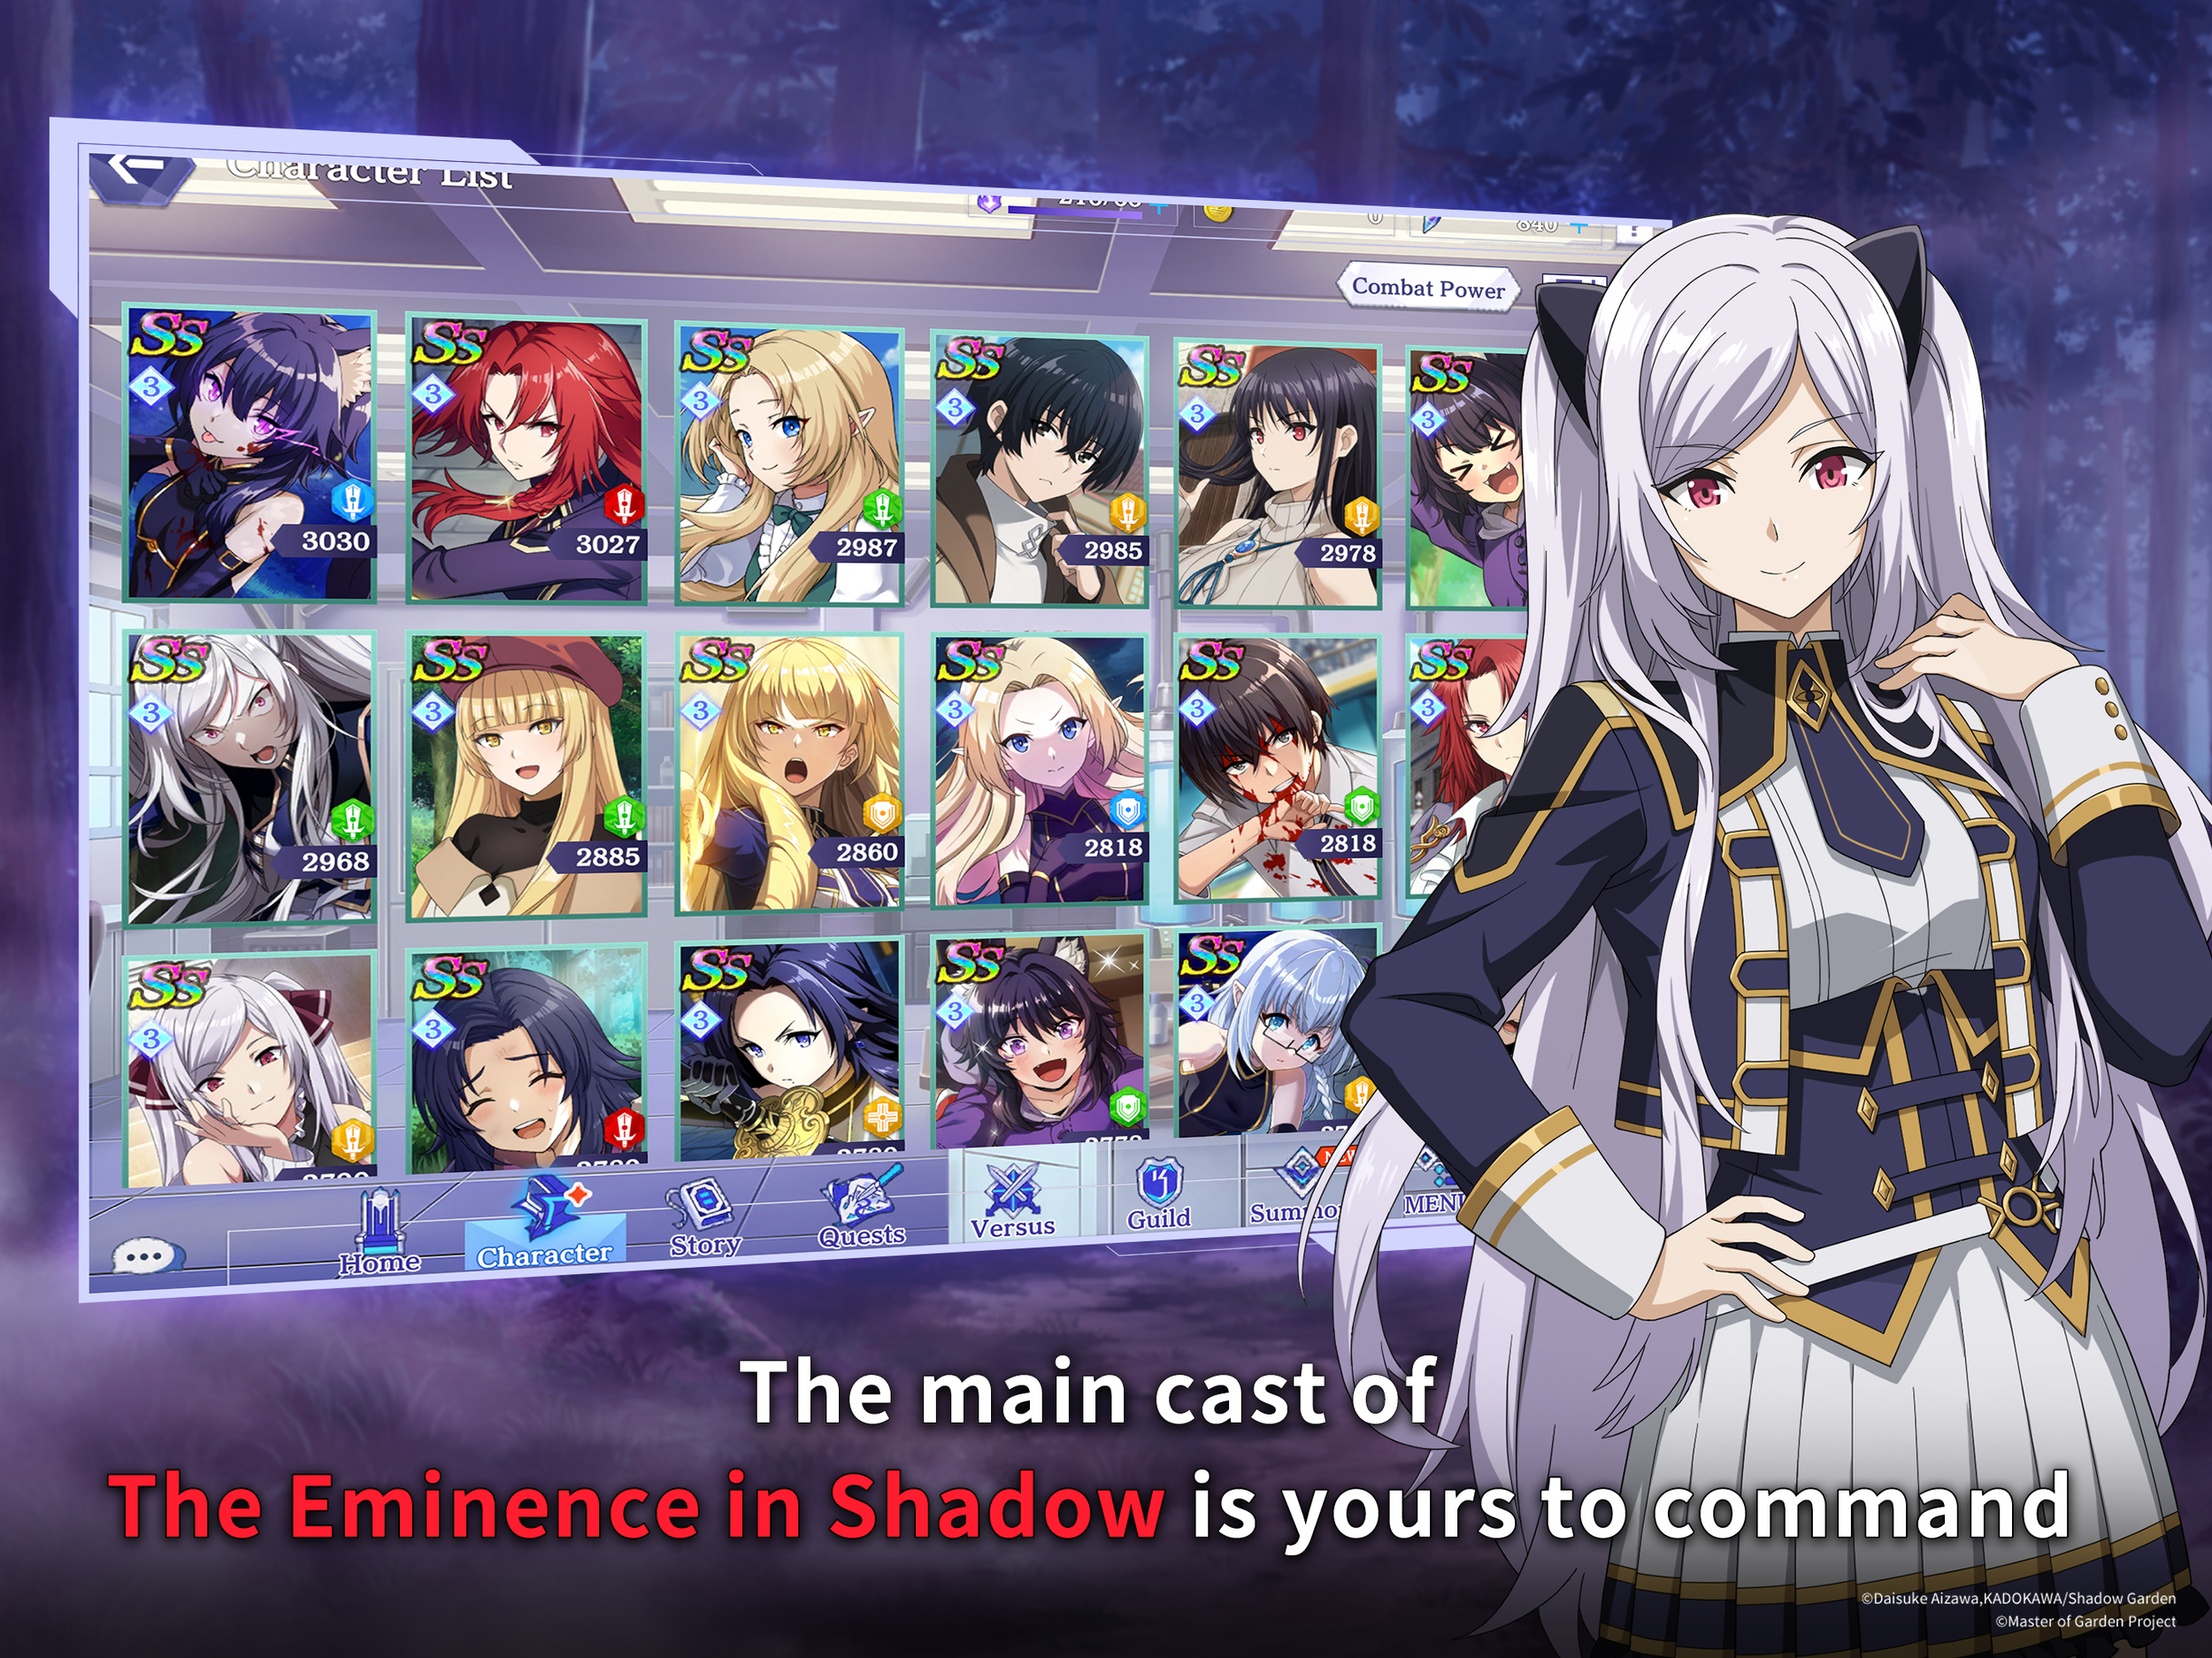 Crunchyroll - Happy anniversary to The Eminence in Shadow: Master of Garden!  ⚔️🥳 🎉 MORE